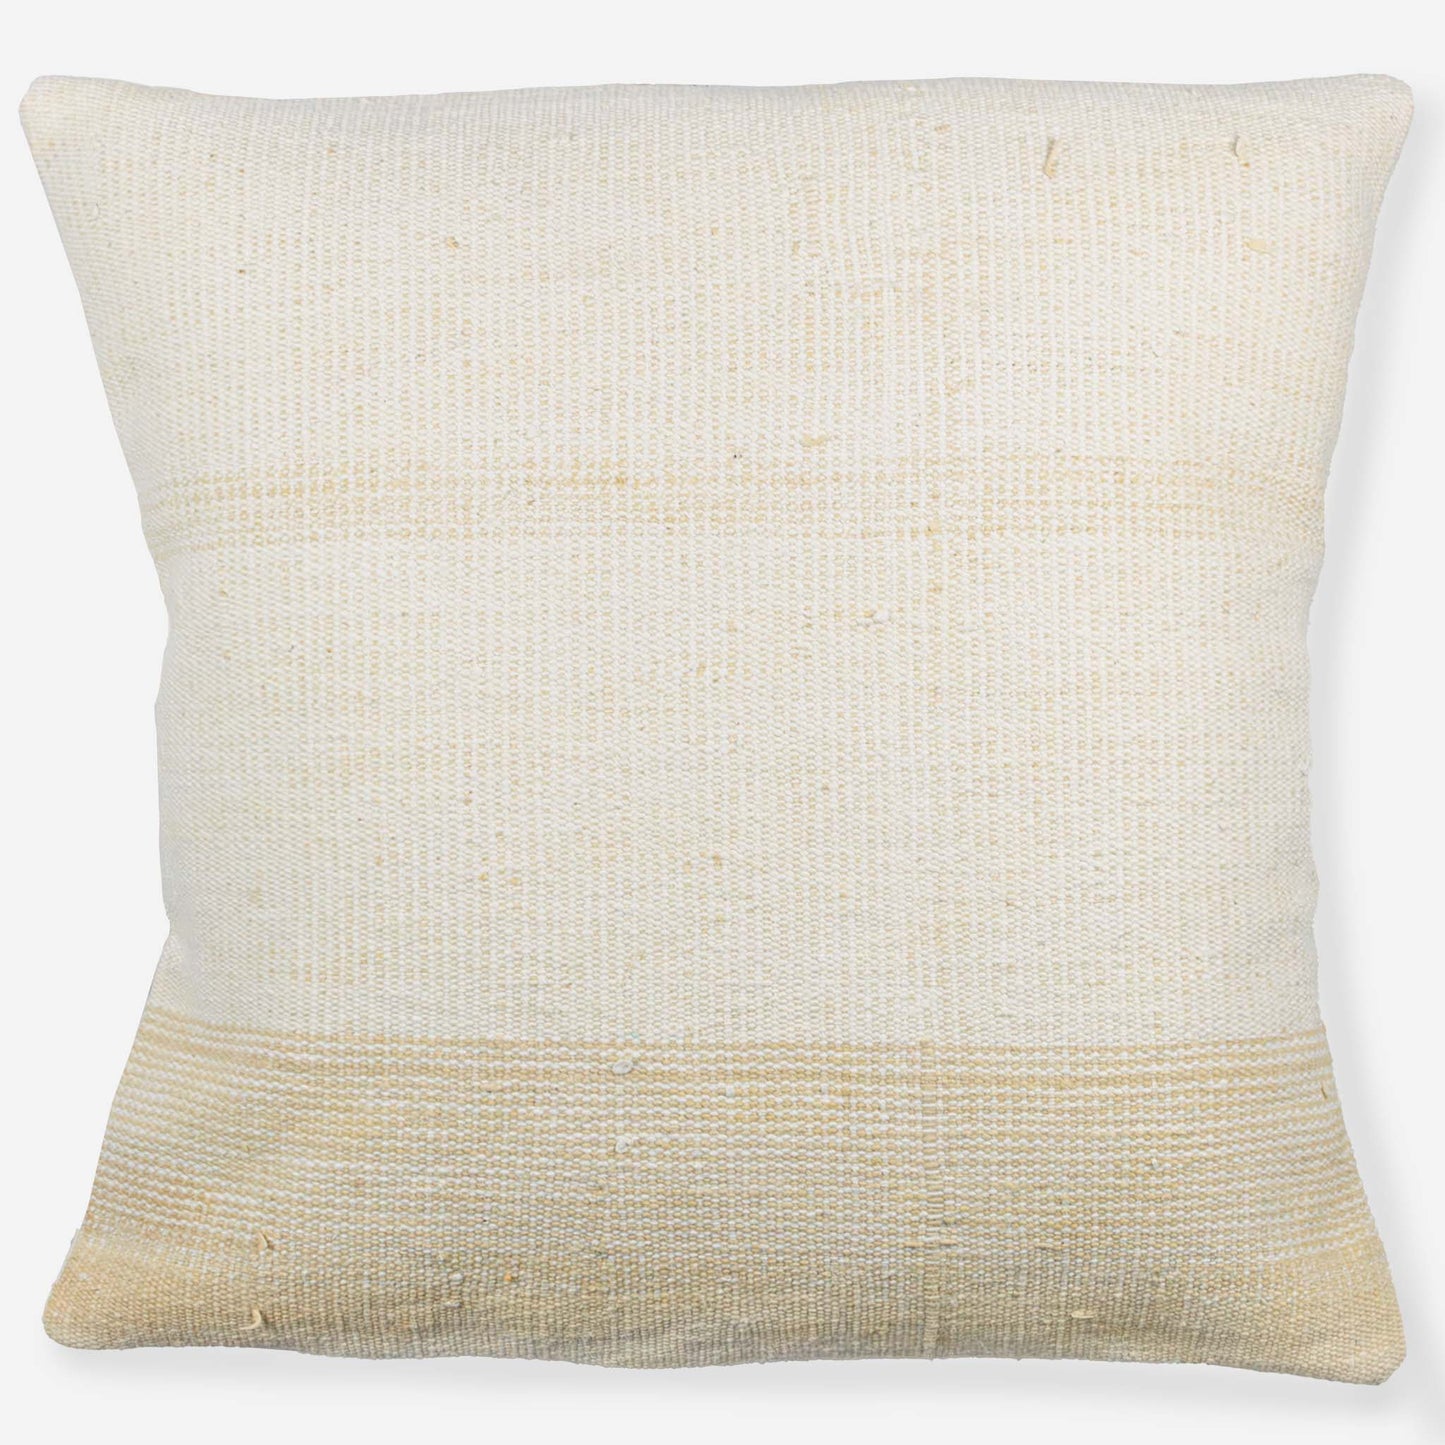 Handwoven turkish kilim pillow cover that is ivory white with tan stripes.